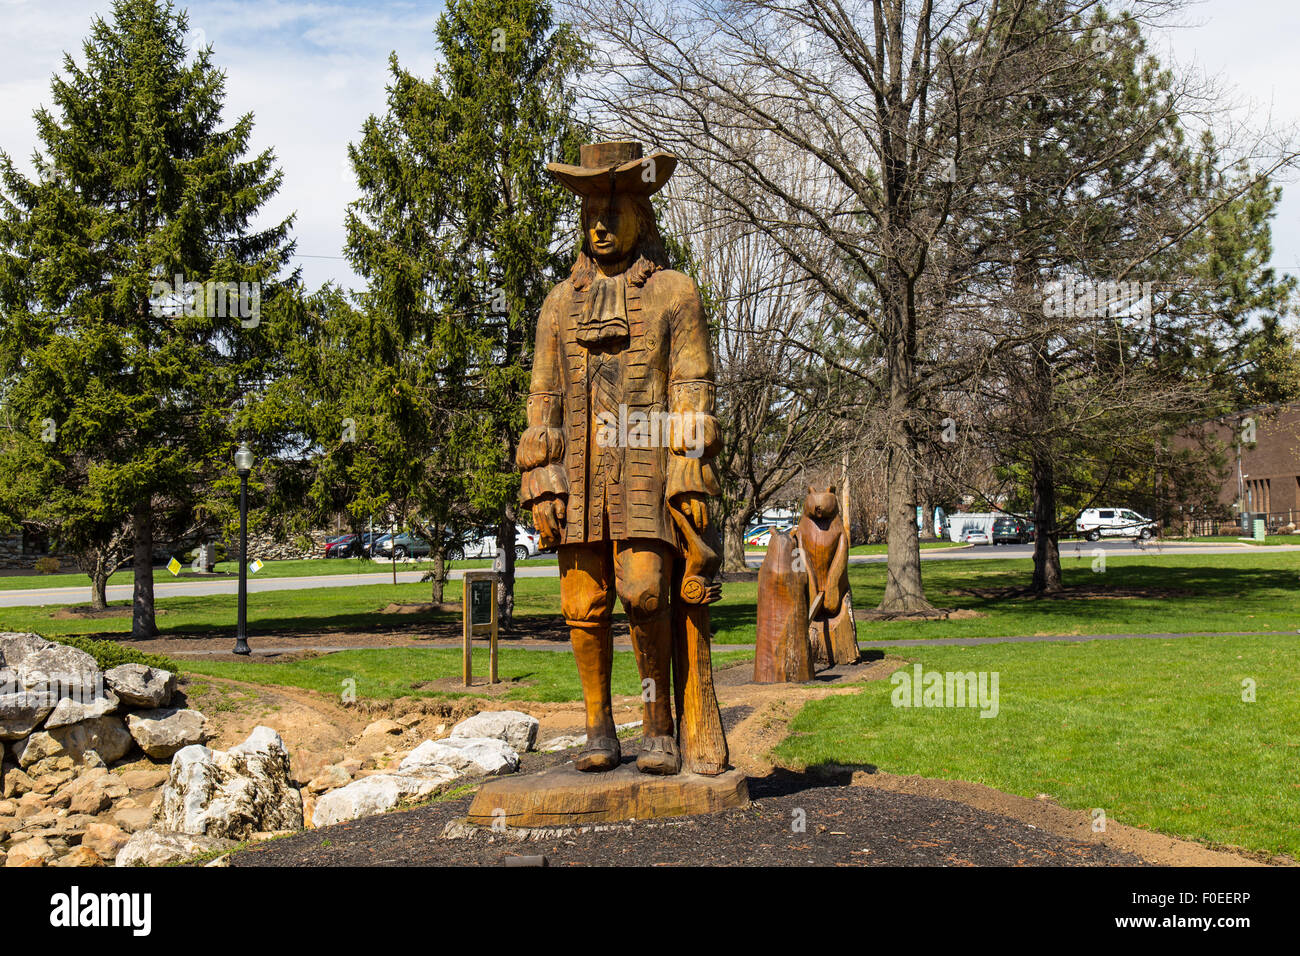 A wooden carved sculpture of Quaker William Penn in a suburban park known as Greenfield near Lancaster, PA. Stock Photo